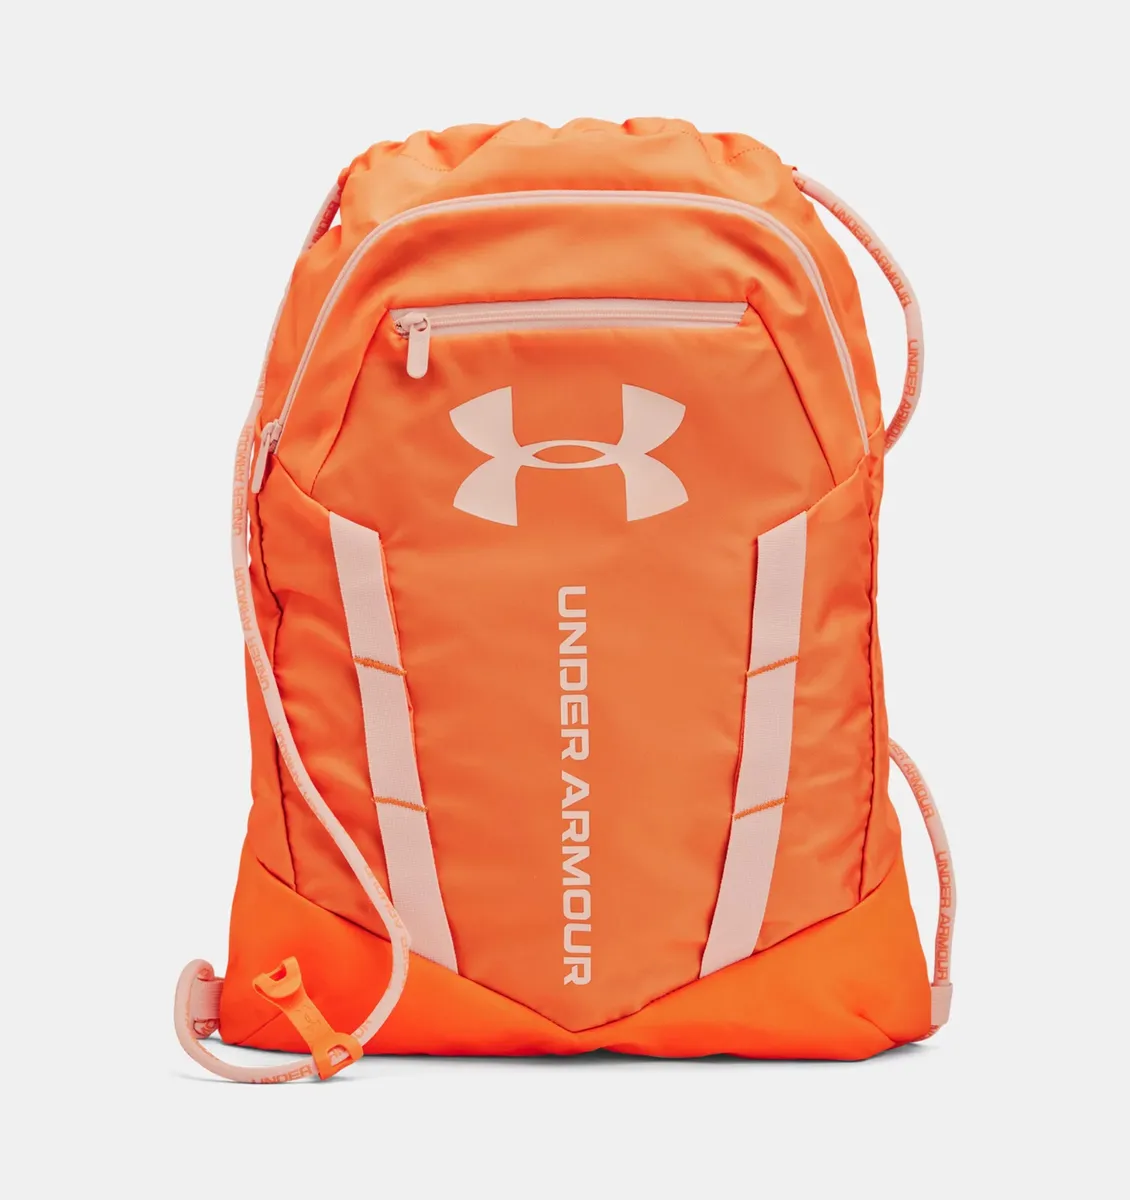 Under armour Gym Bags for sale  eBay